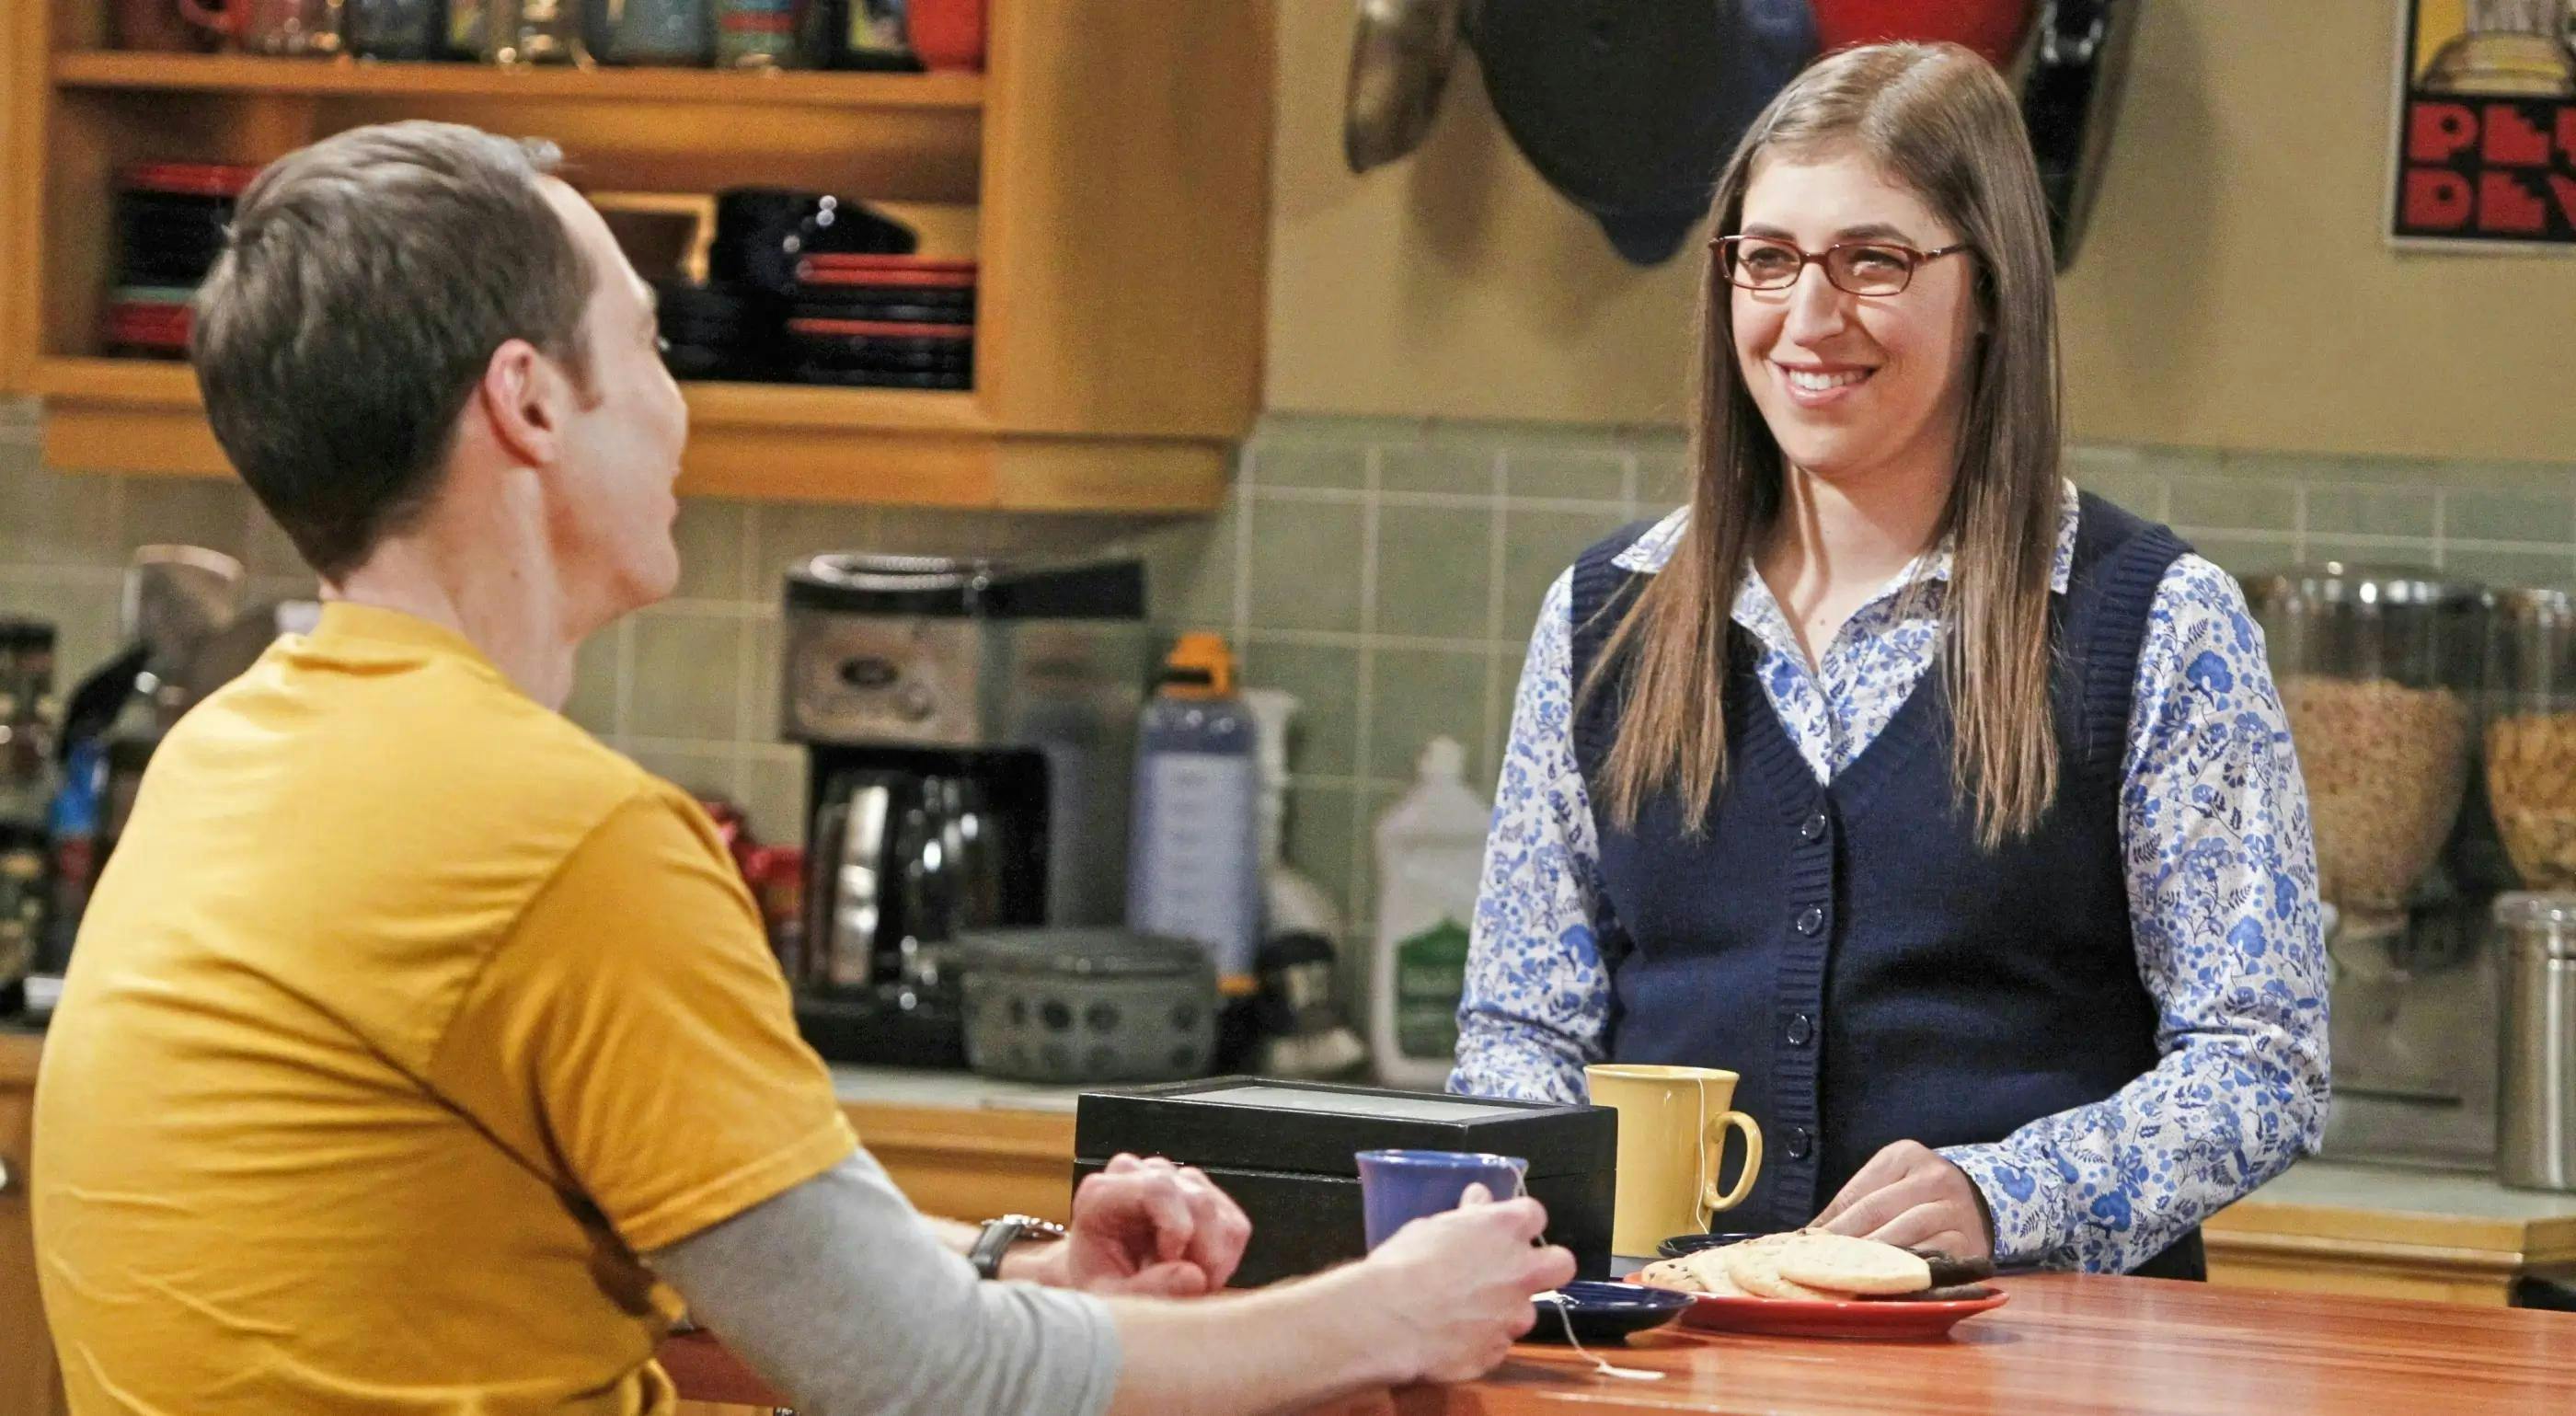 Amy Farrah Fowler personality type